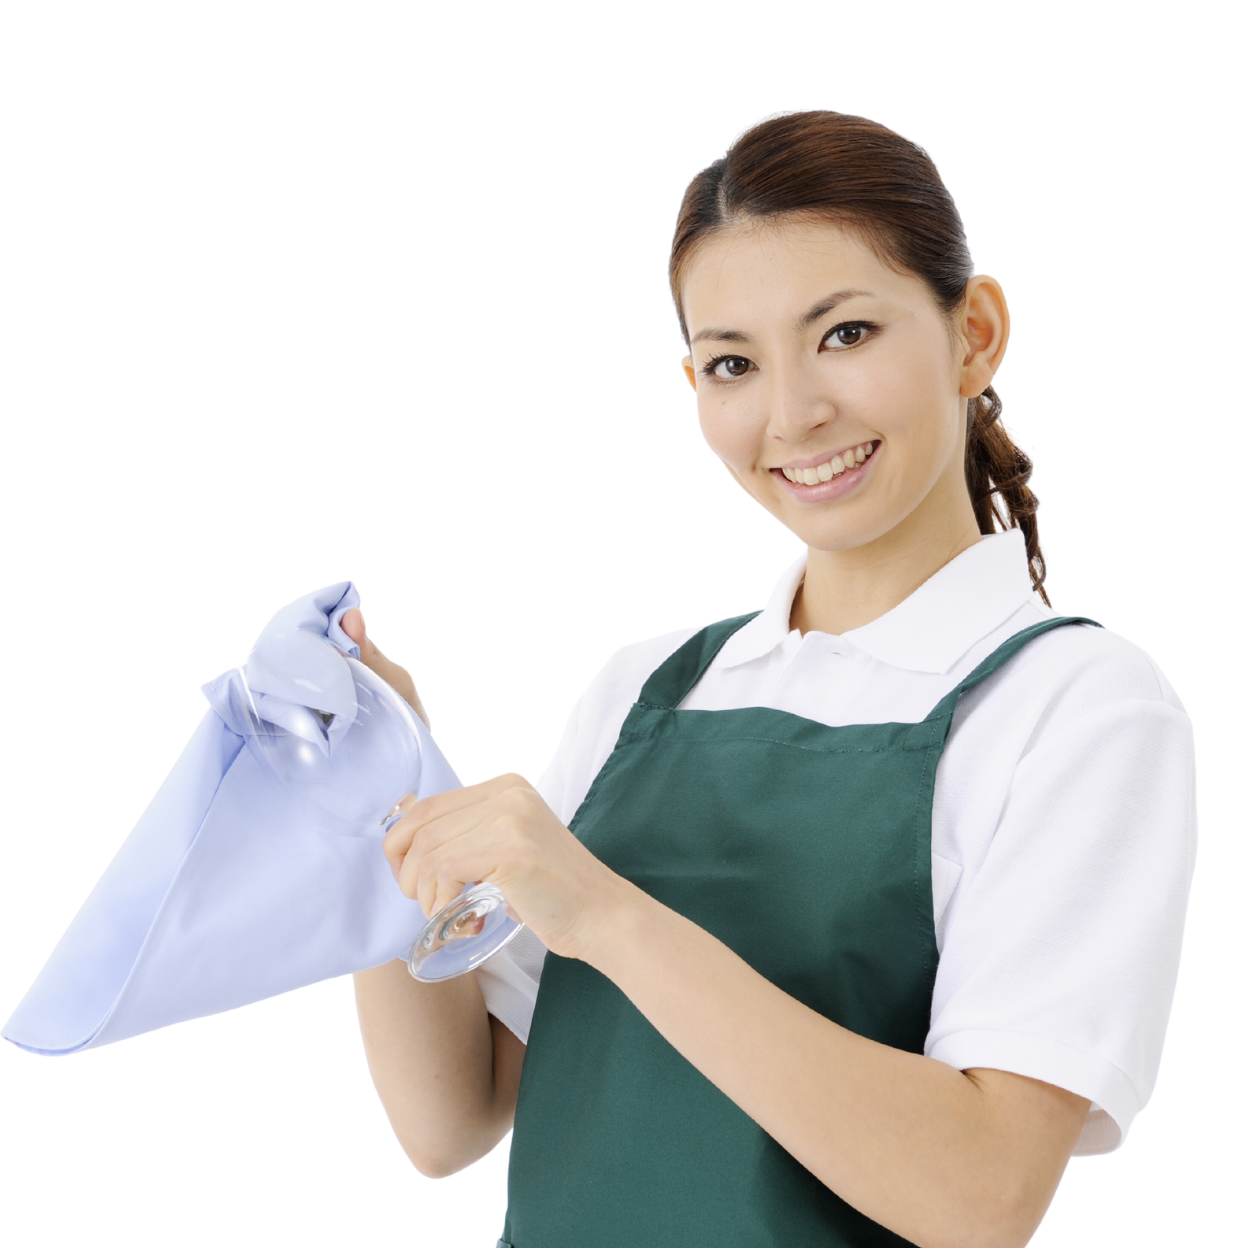 Smiling-young-woman-drying-wine-glass-